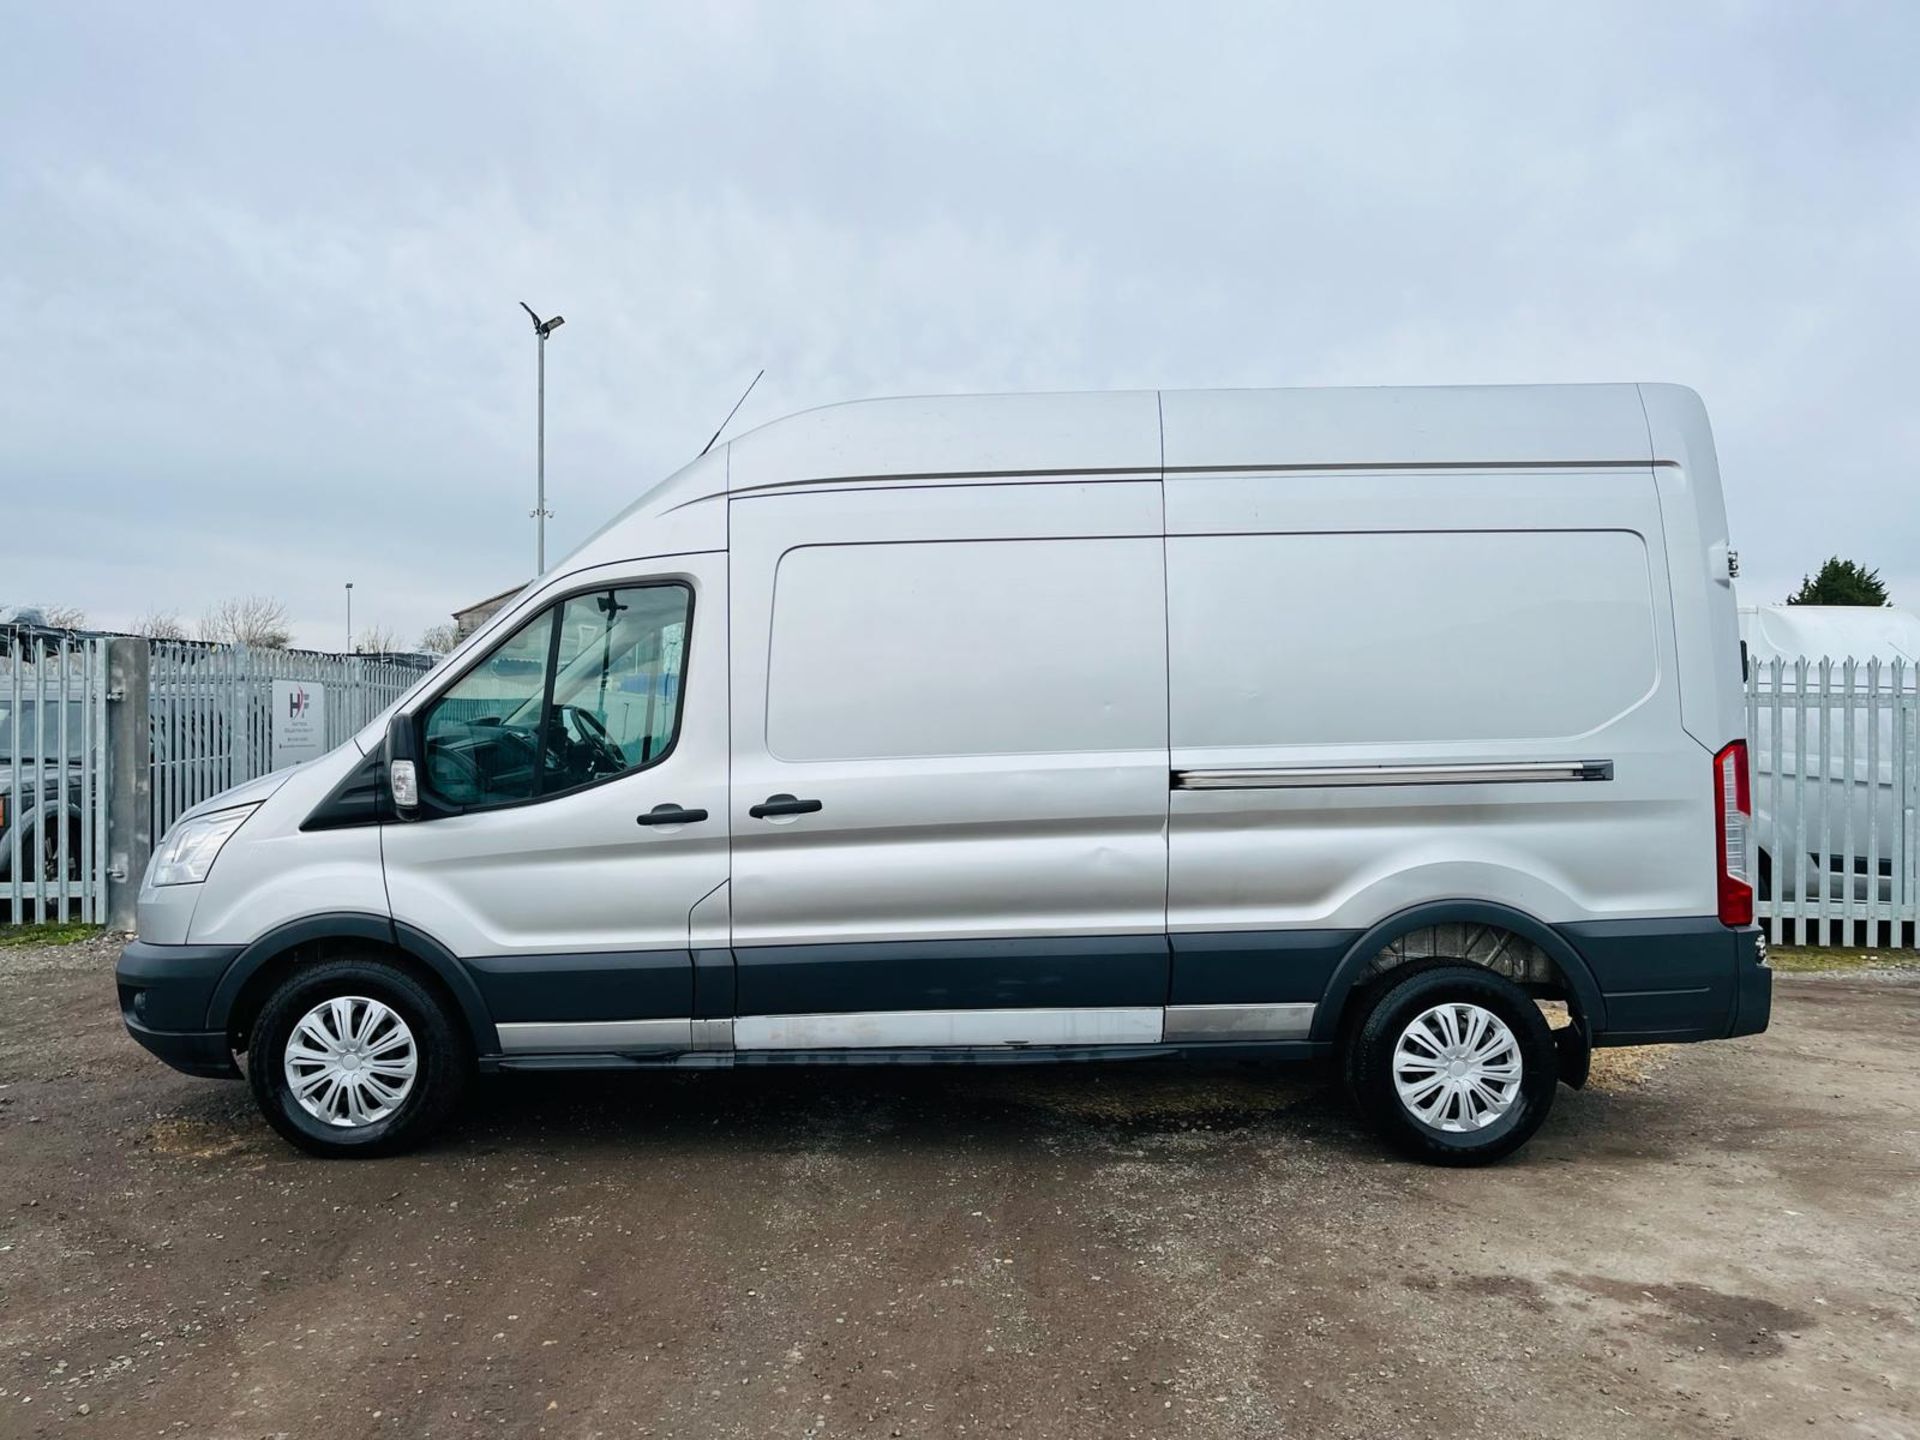 ** ON SALE ** Ford Transit Trend 350 TDCI 125 2.2 L3 H3 2014 '64 Reg' - Parking sensors - Air Con - Image 4 of 27